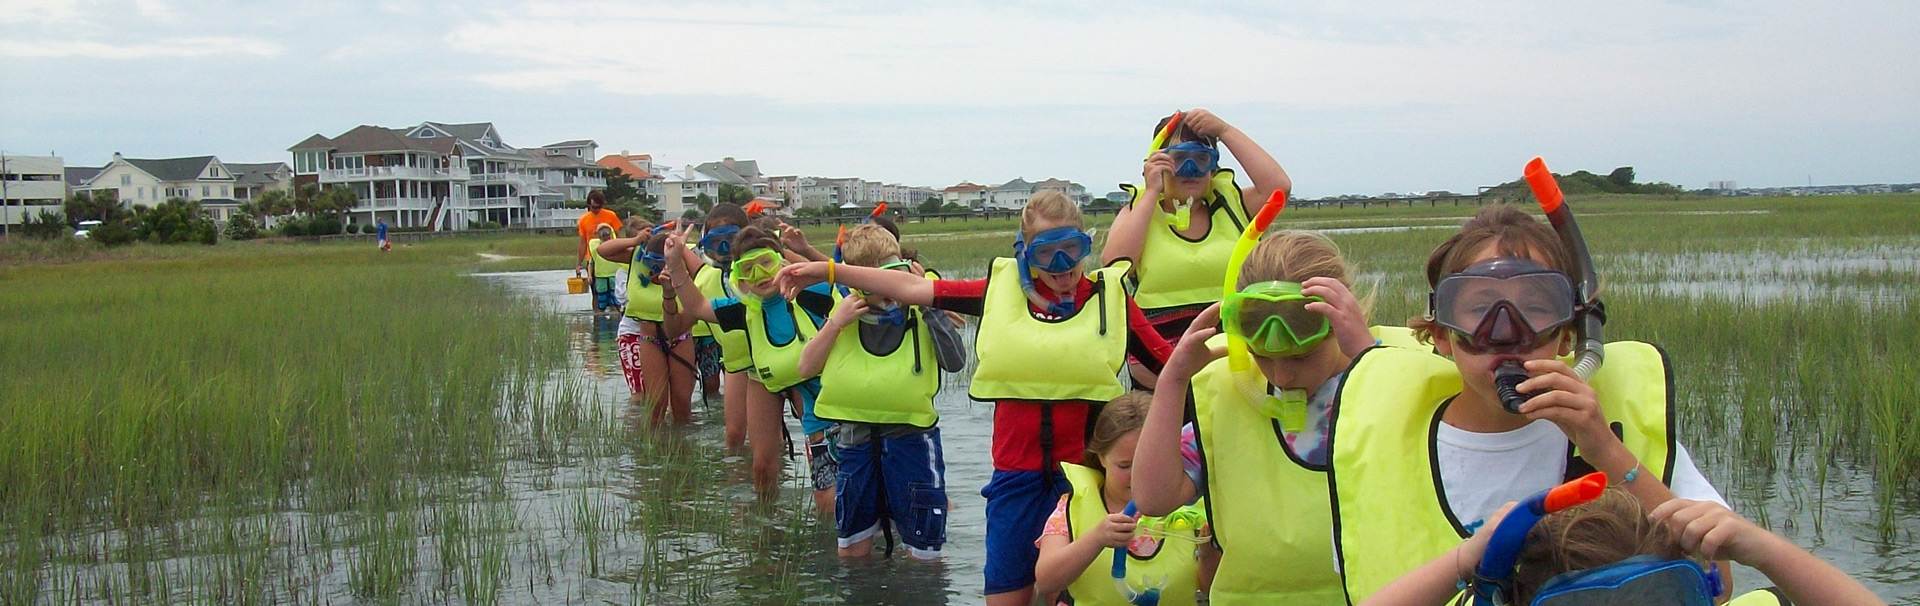 students wearing snorkels and life vests on field trip